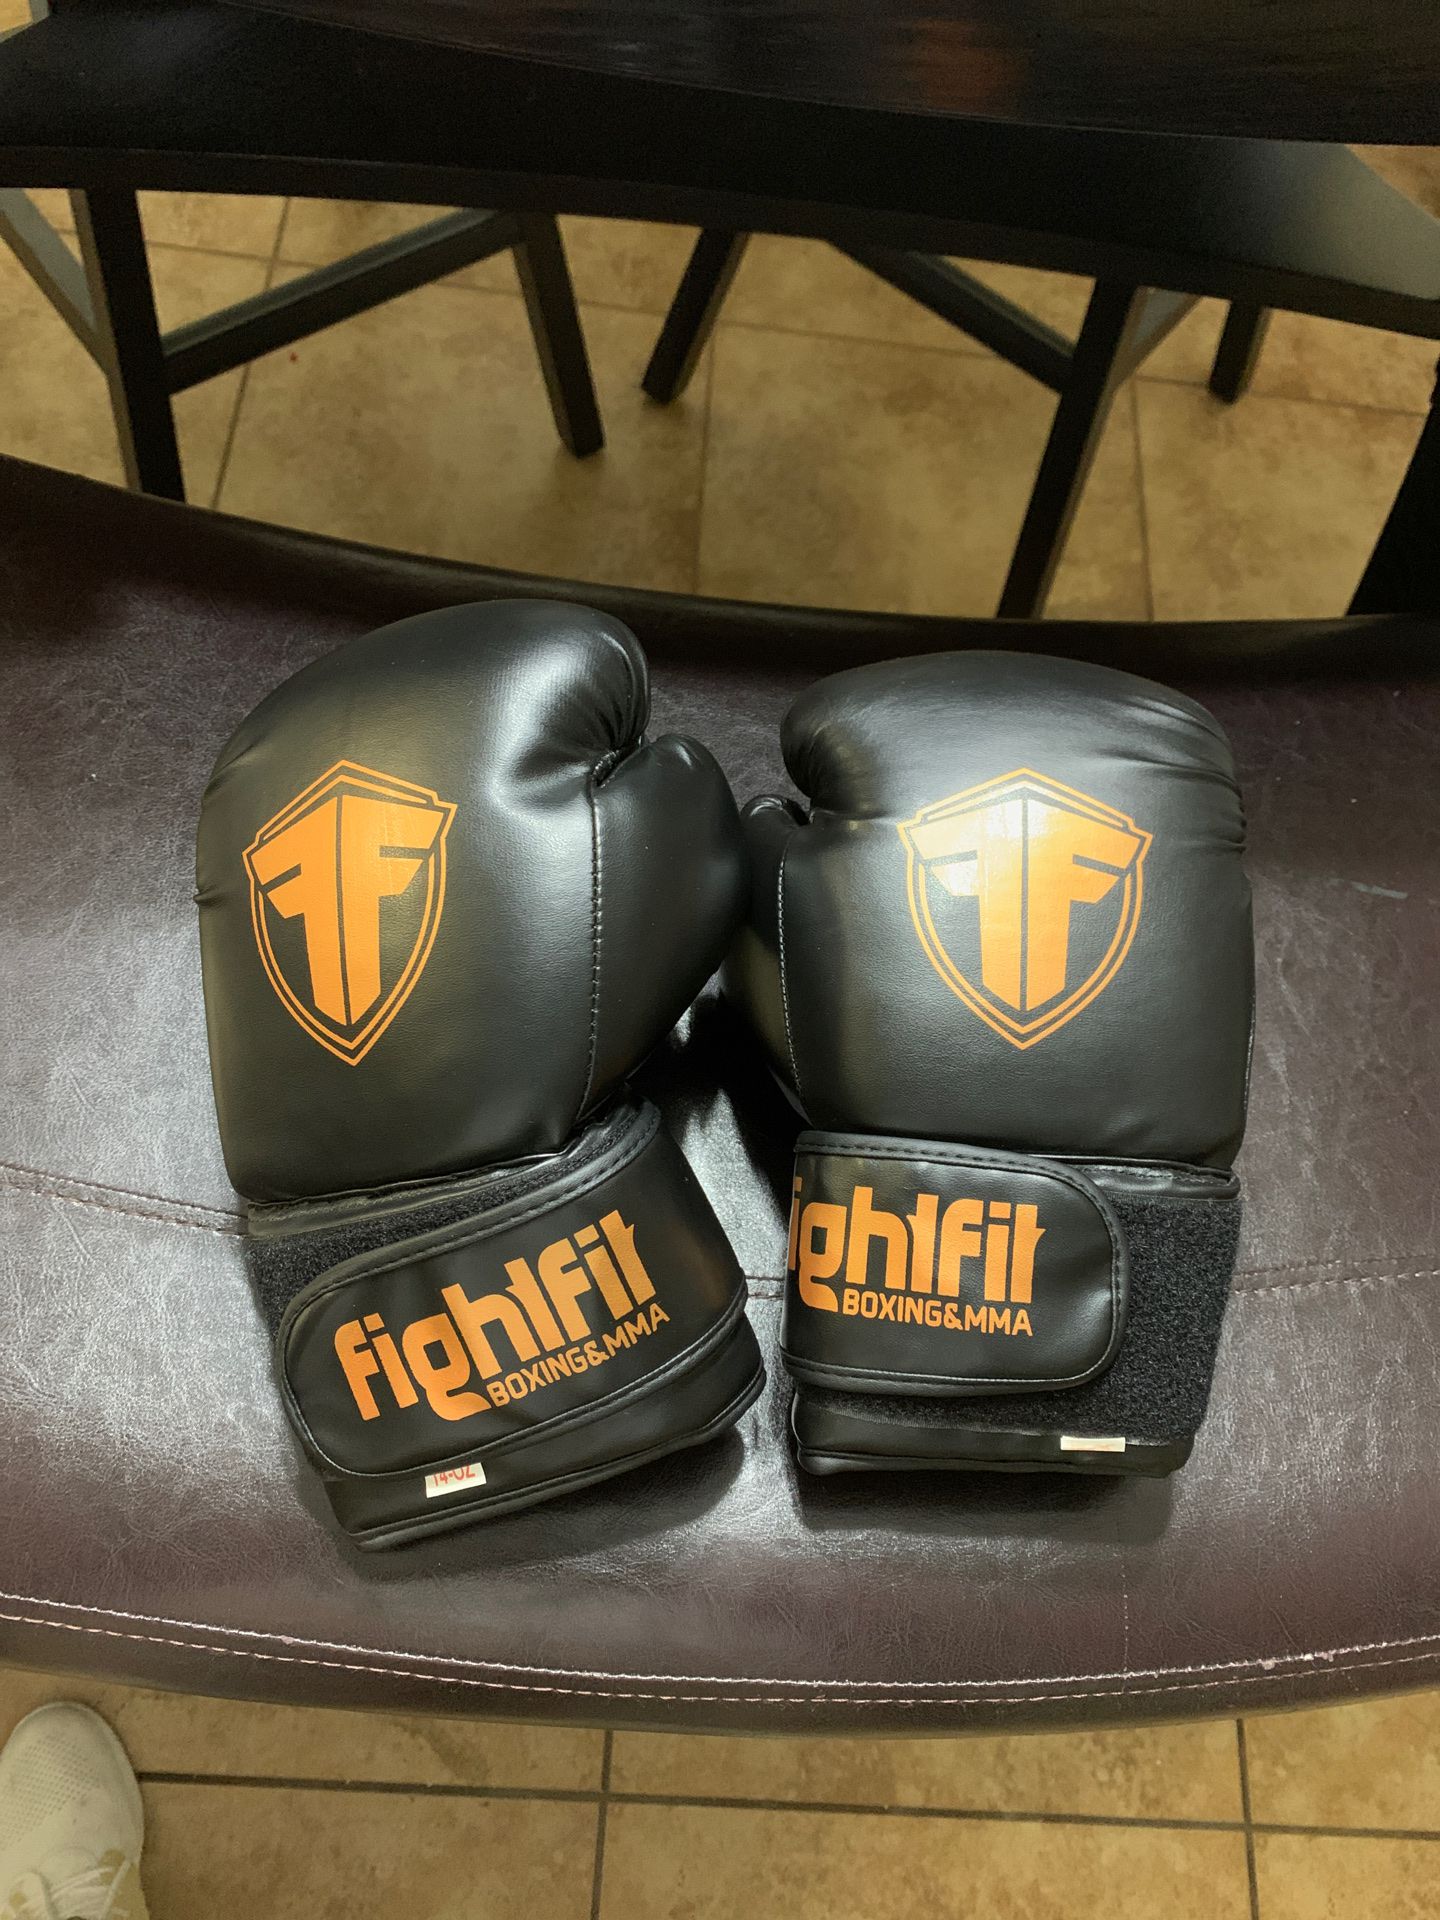 Fightfit boxing gloves like new